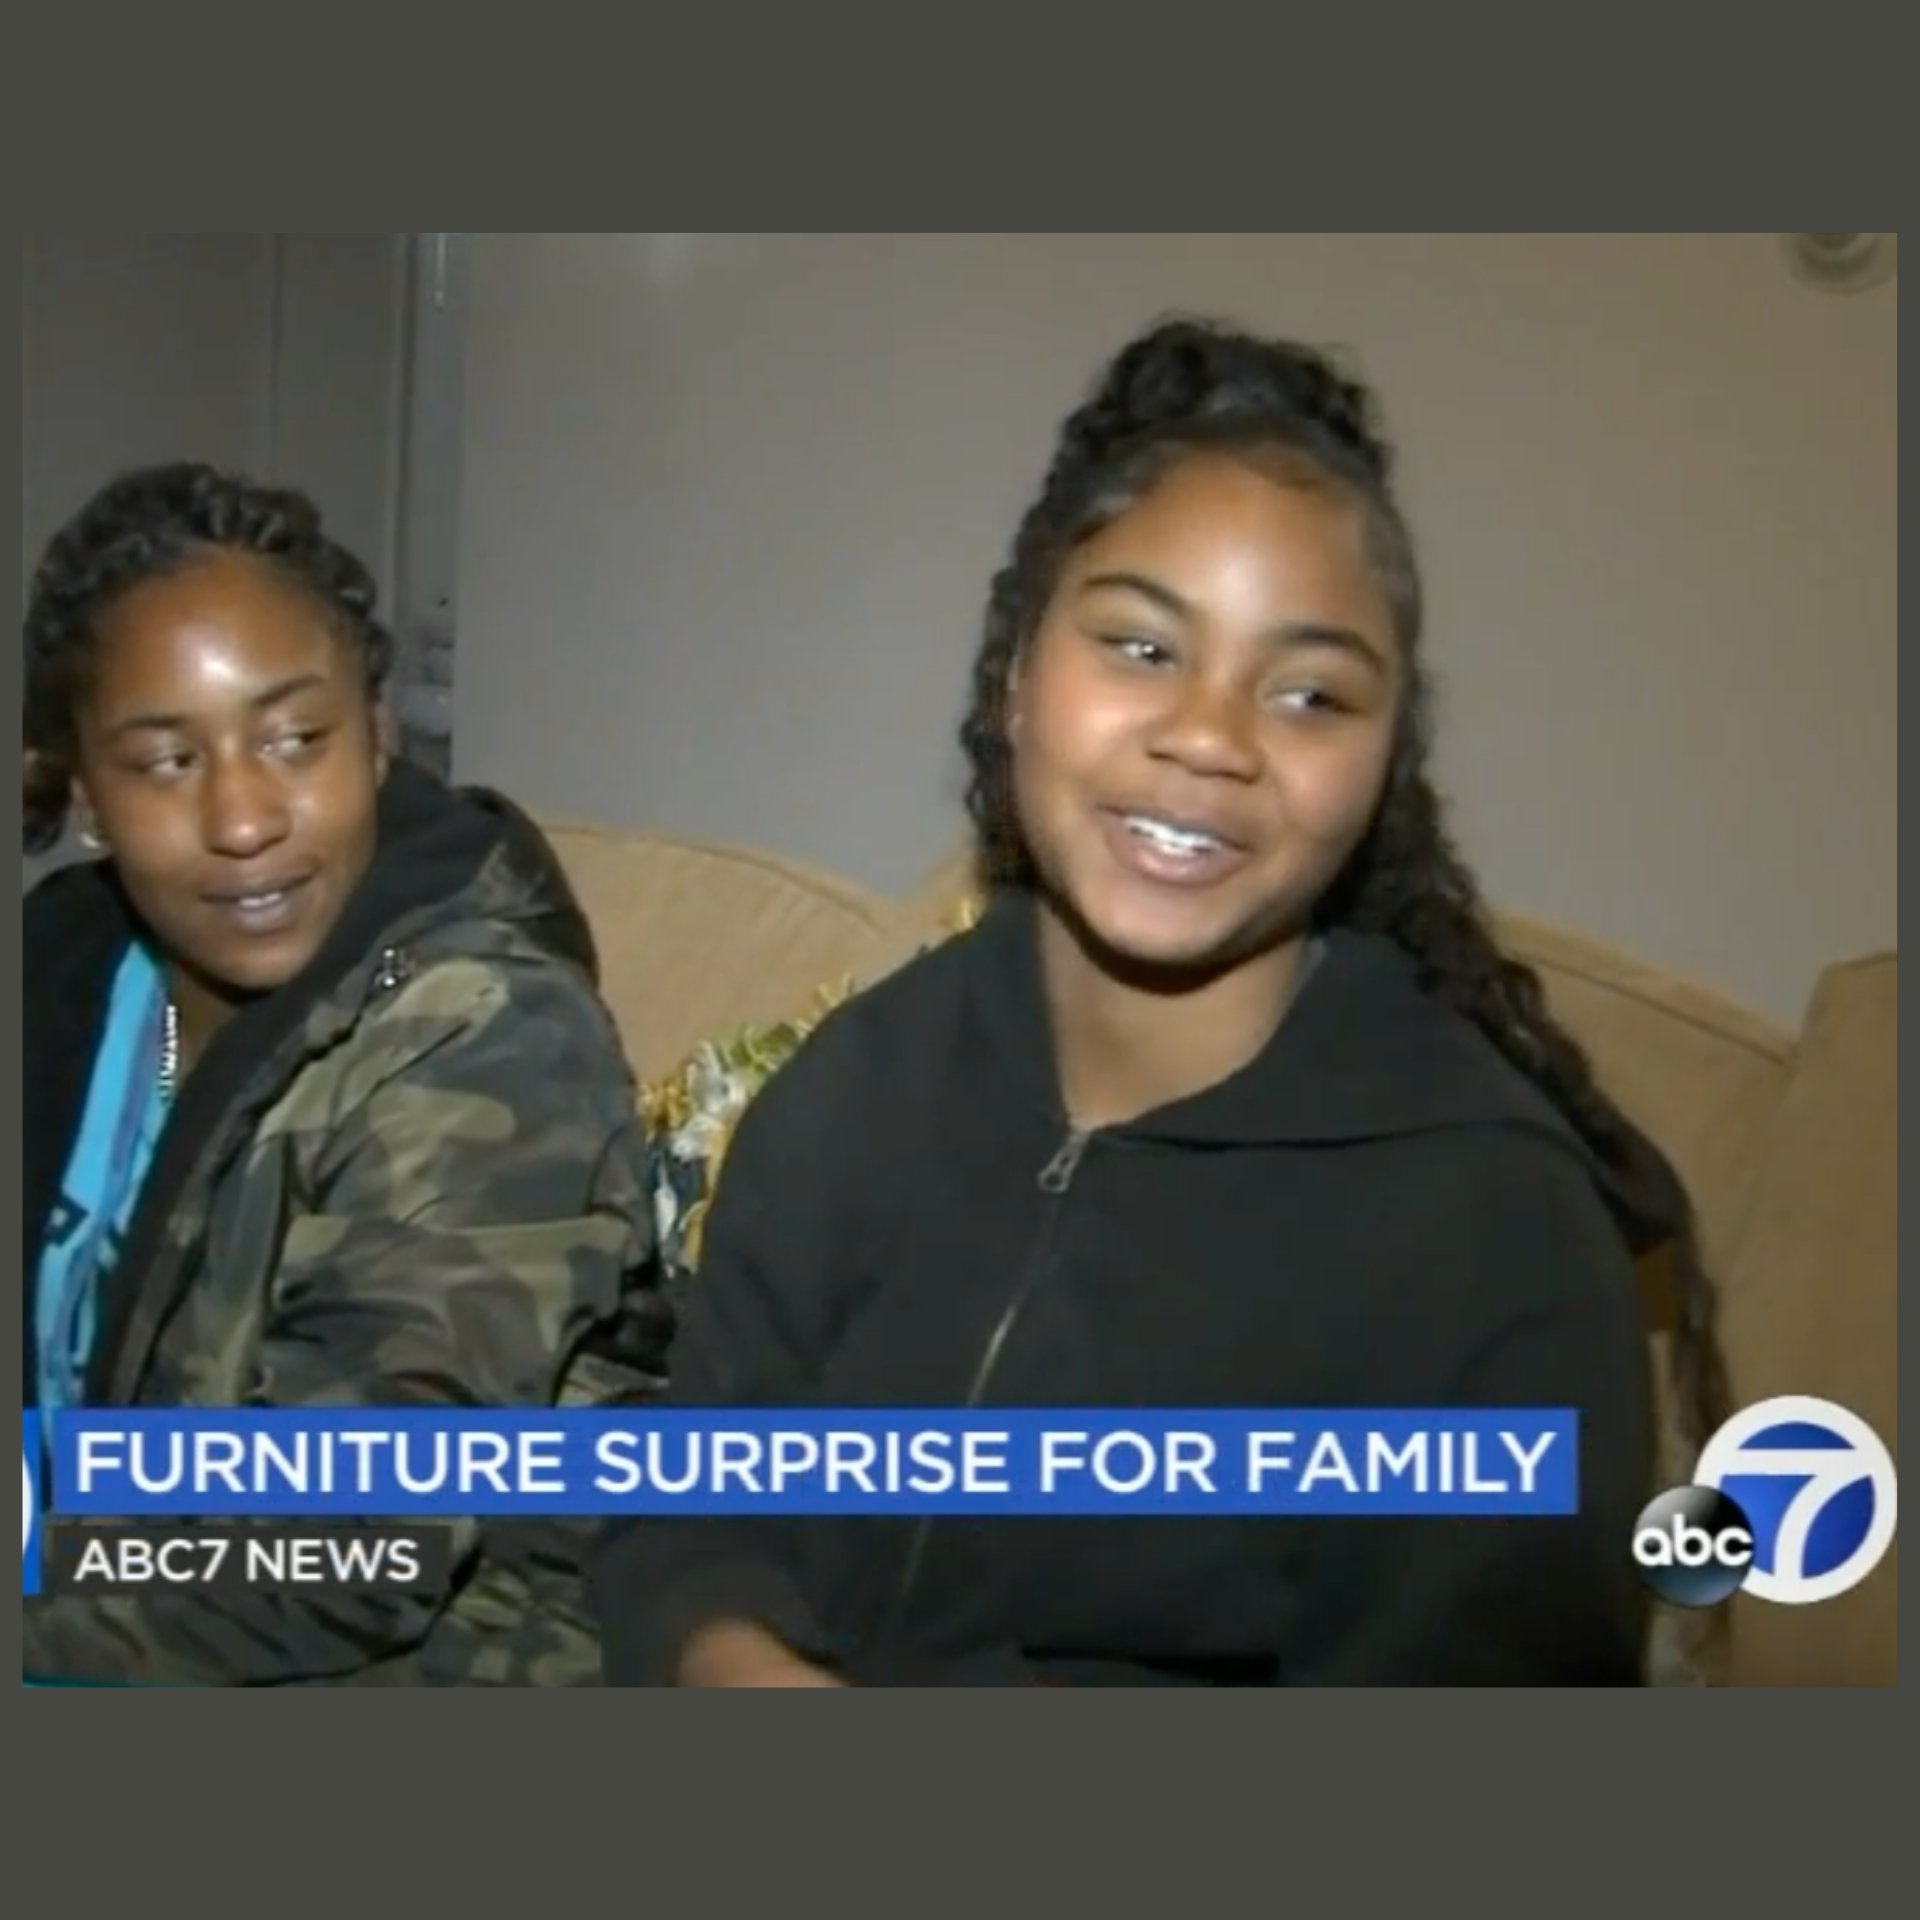 A single Mother's journey to a fresh start with fully furnished housing